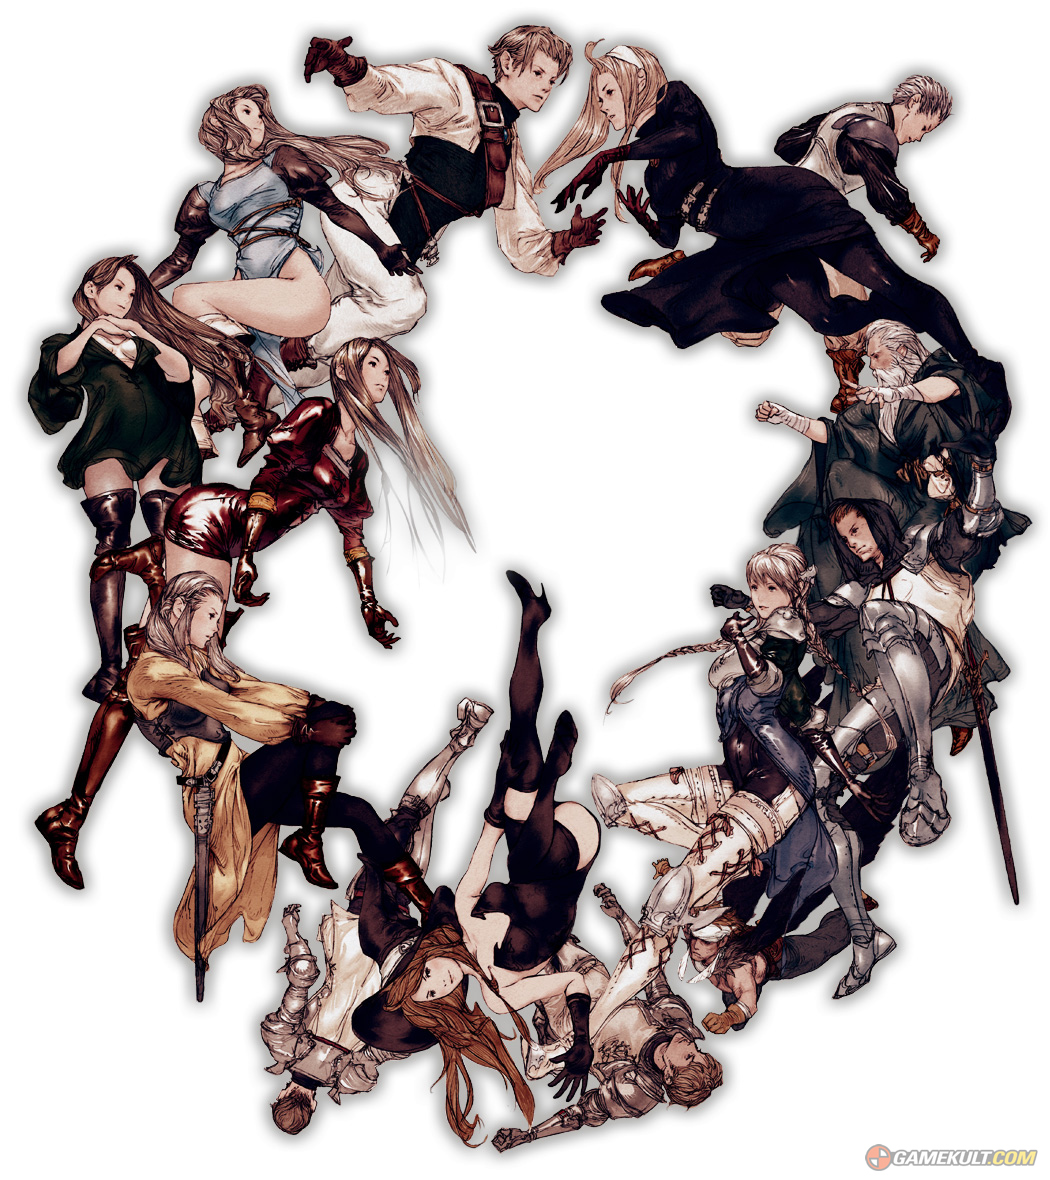 Tactics Ogre: Let Us Cling Together and Scan Gallery